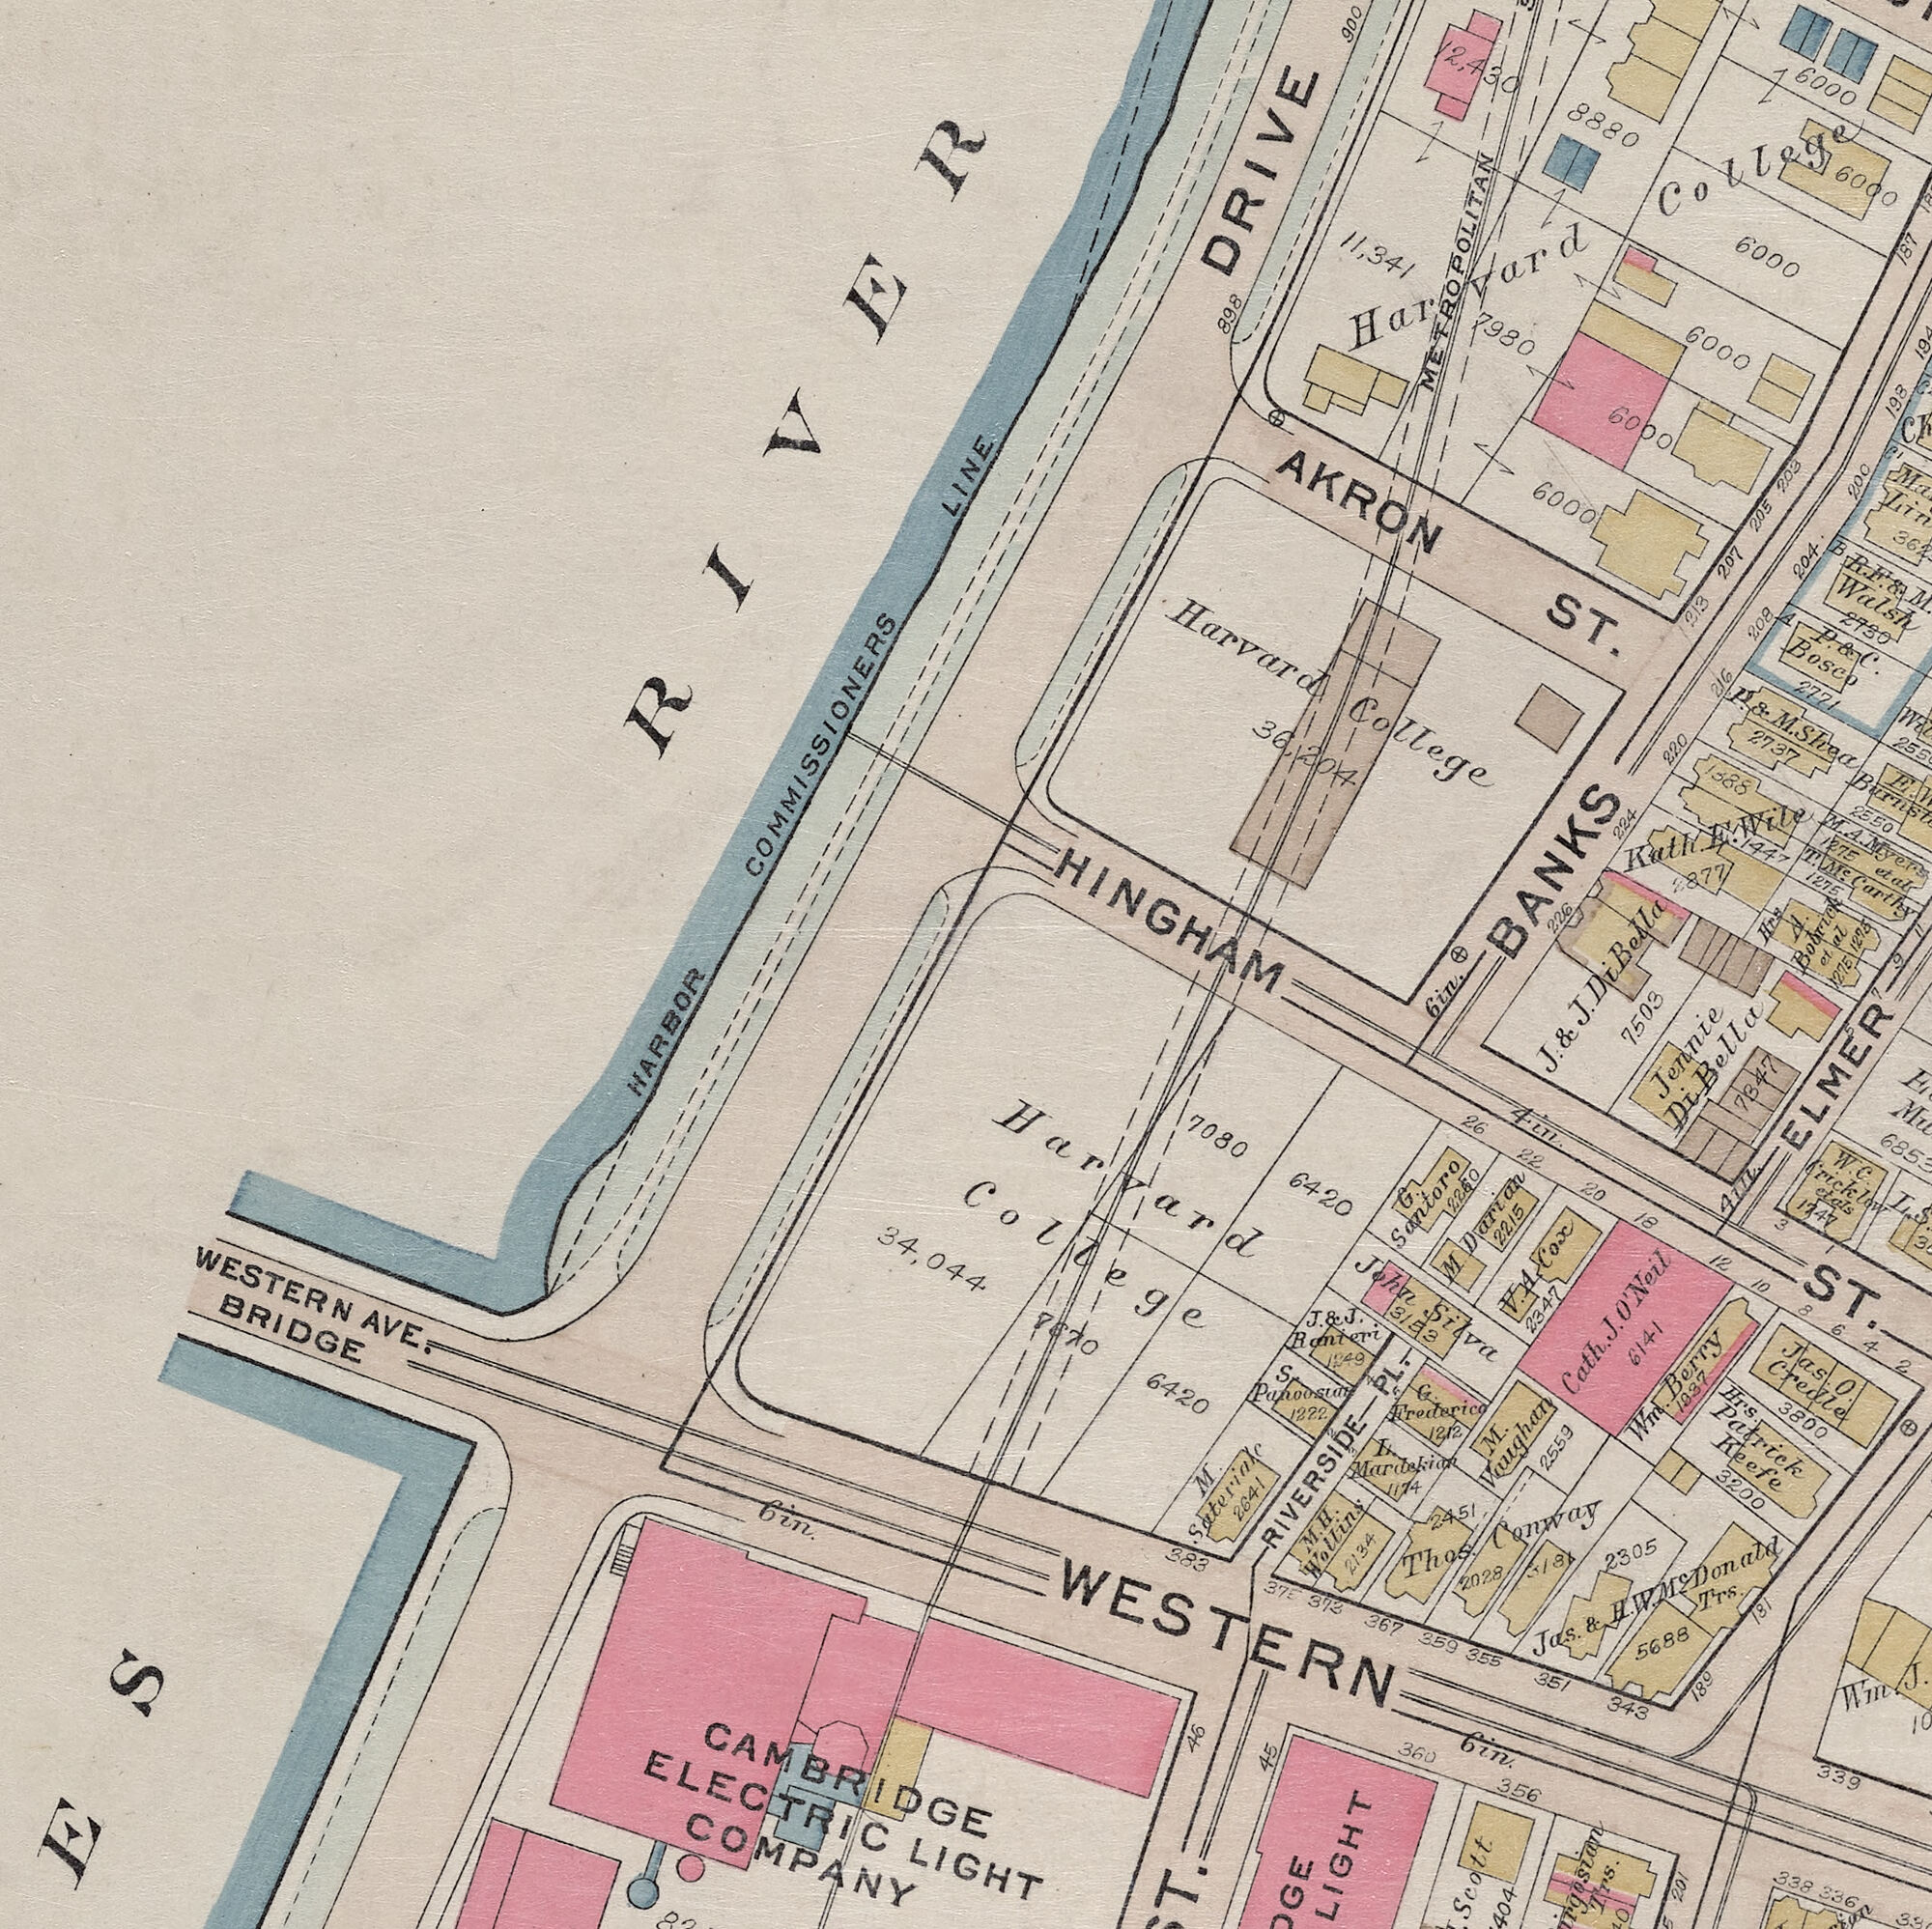 Further east along the Charles River above Western Ave, Harvard purchased a few parcels of land without making any changes. Sitting on land without doing any demolition or renovation was not an uncommon strategy for Harvard and other universities–often waiting until more land could be bought before begining work on new buildings.